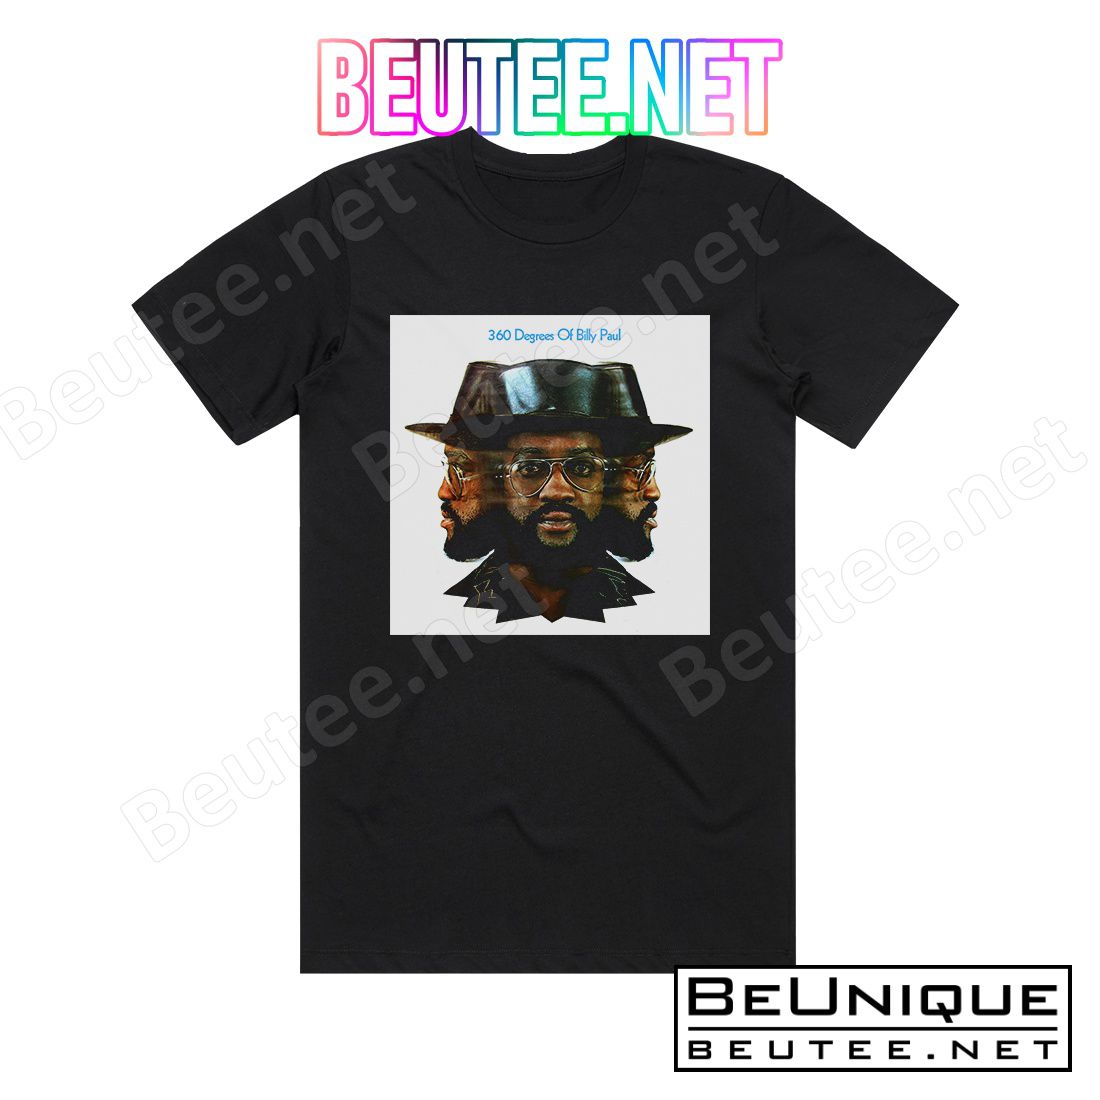 Billy Paul 360 Degrees Of Billy Paul Album Cover T-Shirt